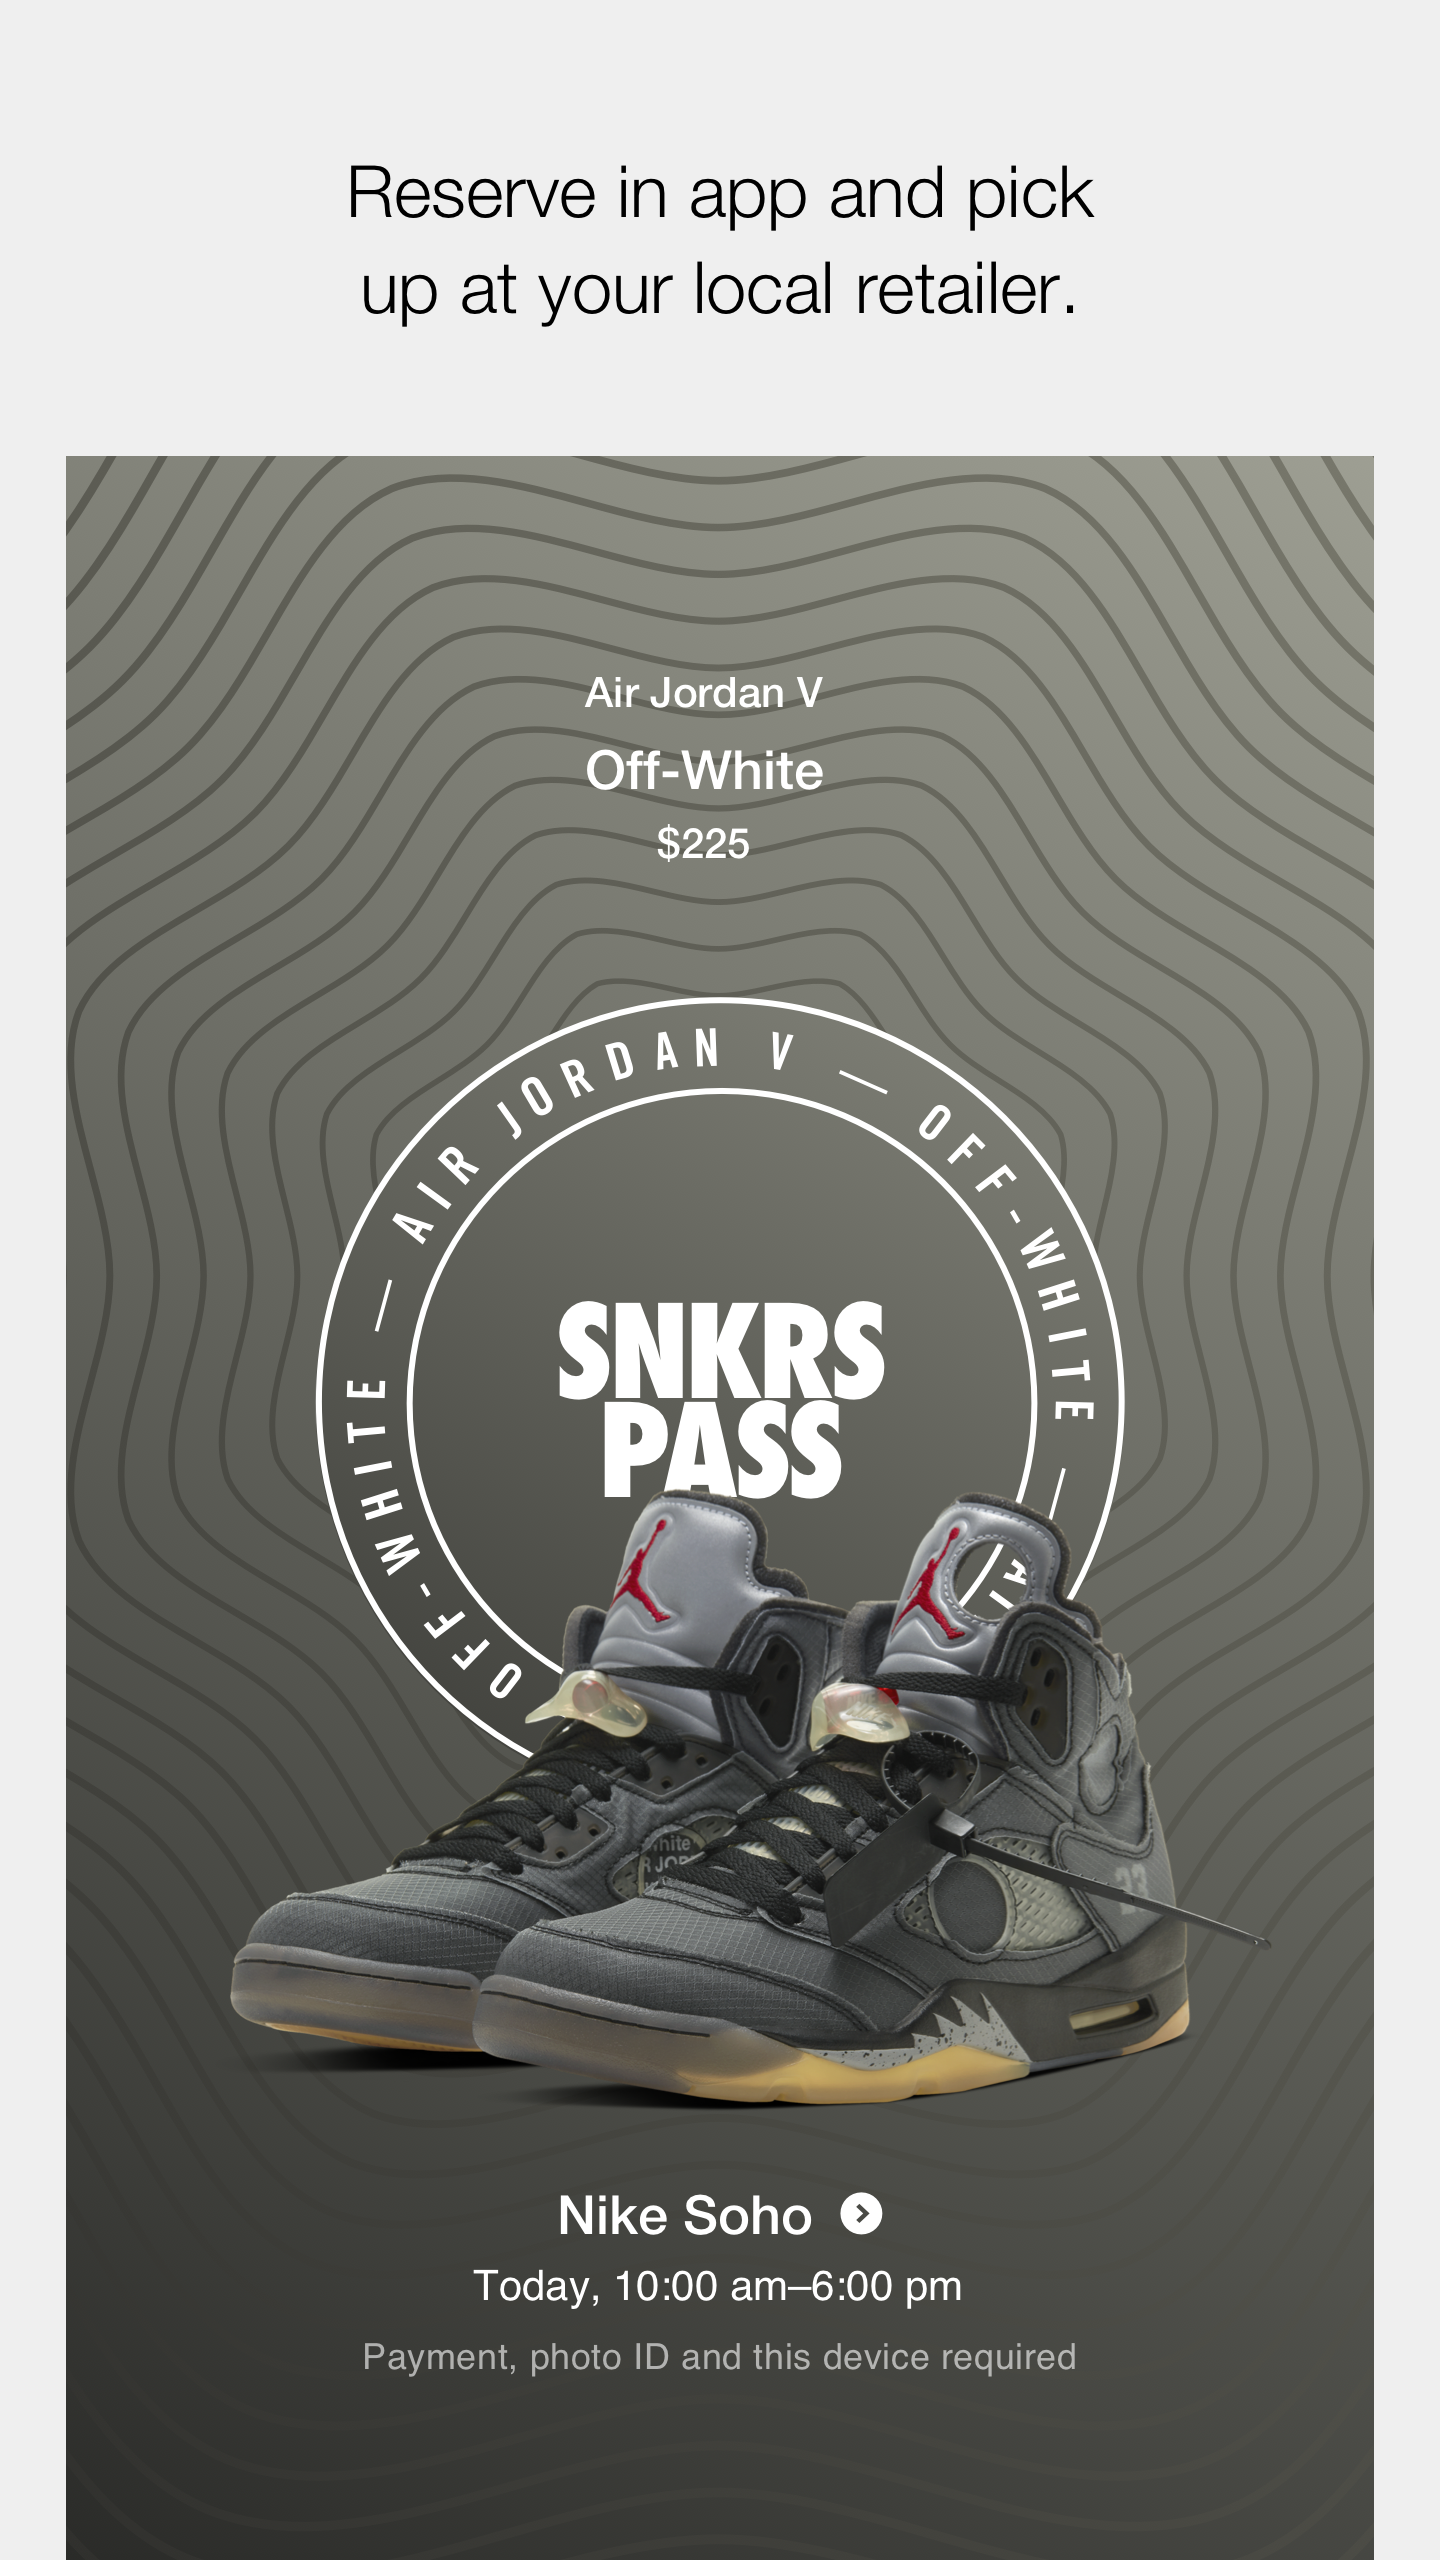 Nike SNKRS: Shoes & Streetwear APK 3.22.3 for Android – Download Nike SNKRS:  Shoes & Streetwear APK Latest Version from APKFab.com